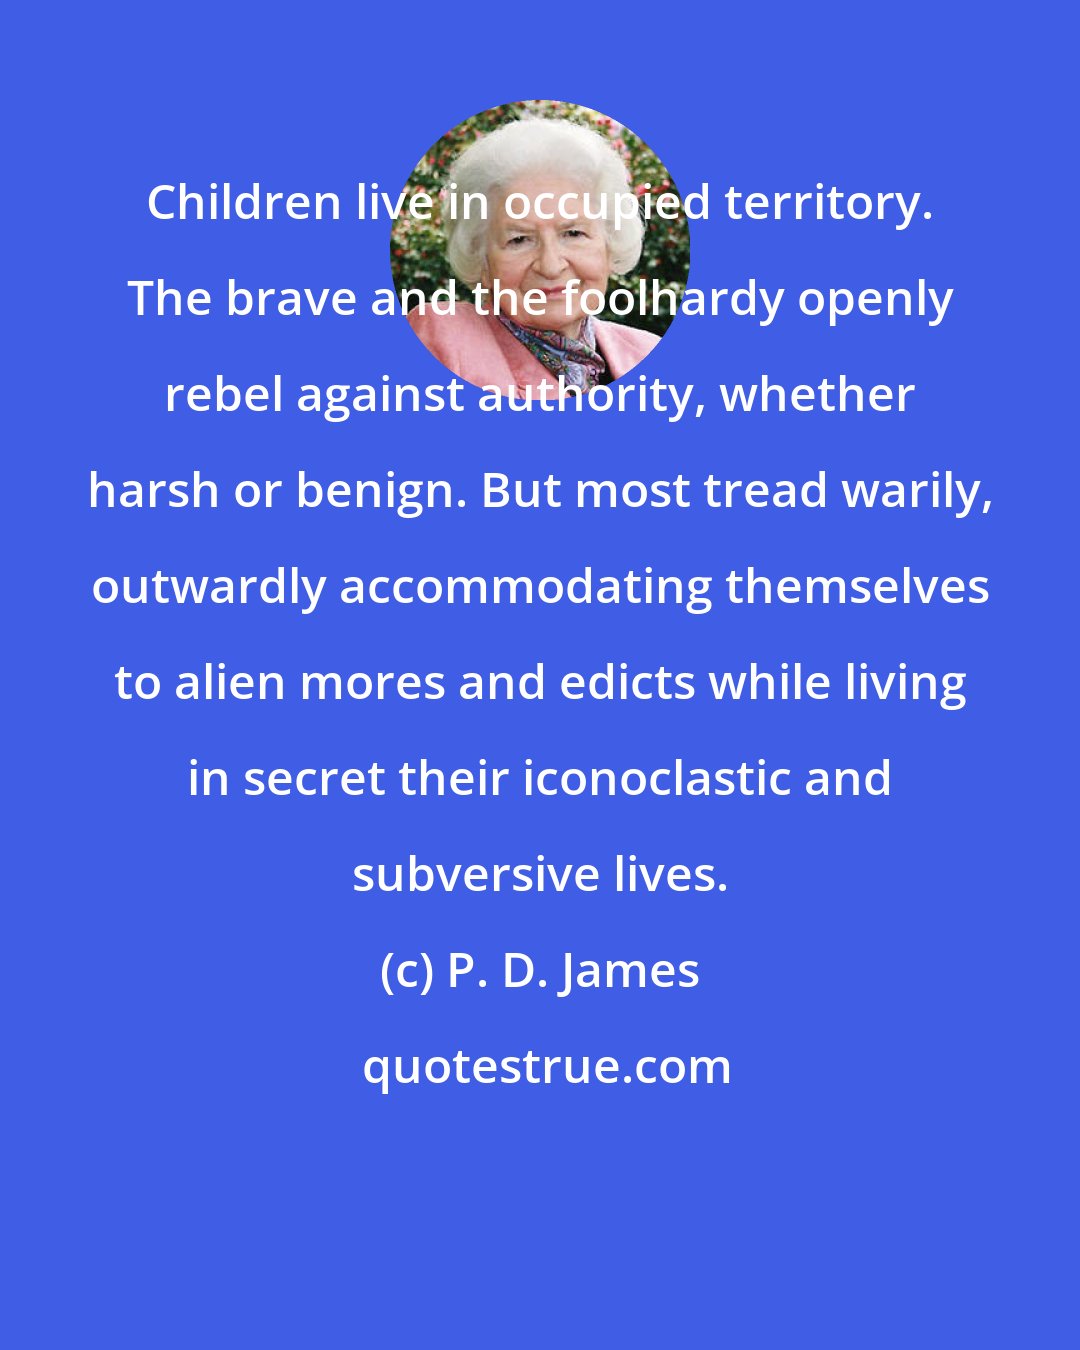 P. D. James: Children live in occupied territory. The brave and the foolhardy openly rebel against authority, whether harsh or benign. But most tread warily, outwardly accommodating themselves to alien mores and edicts while living in secret their iconoclastic and subversive lives.